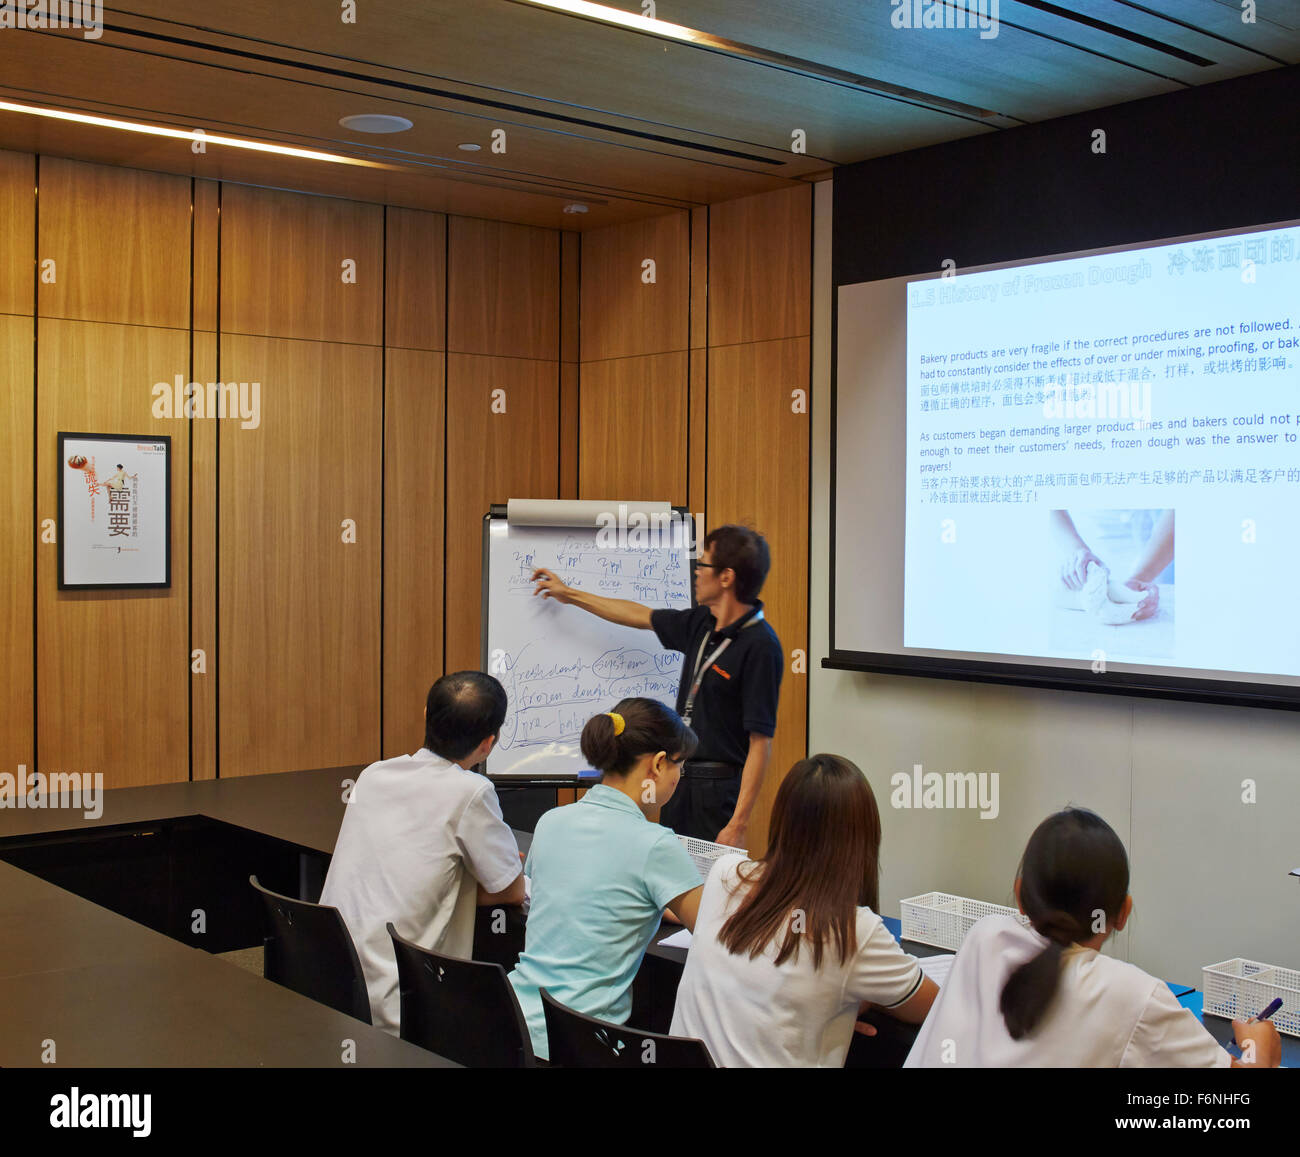 Seminar room with employees. BreadTalk IHQ, Singapore, Singapore. Architect: Kay Ngeee Tan Architects, 2014. Stock Photo